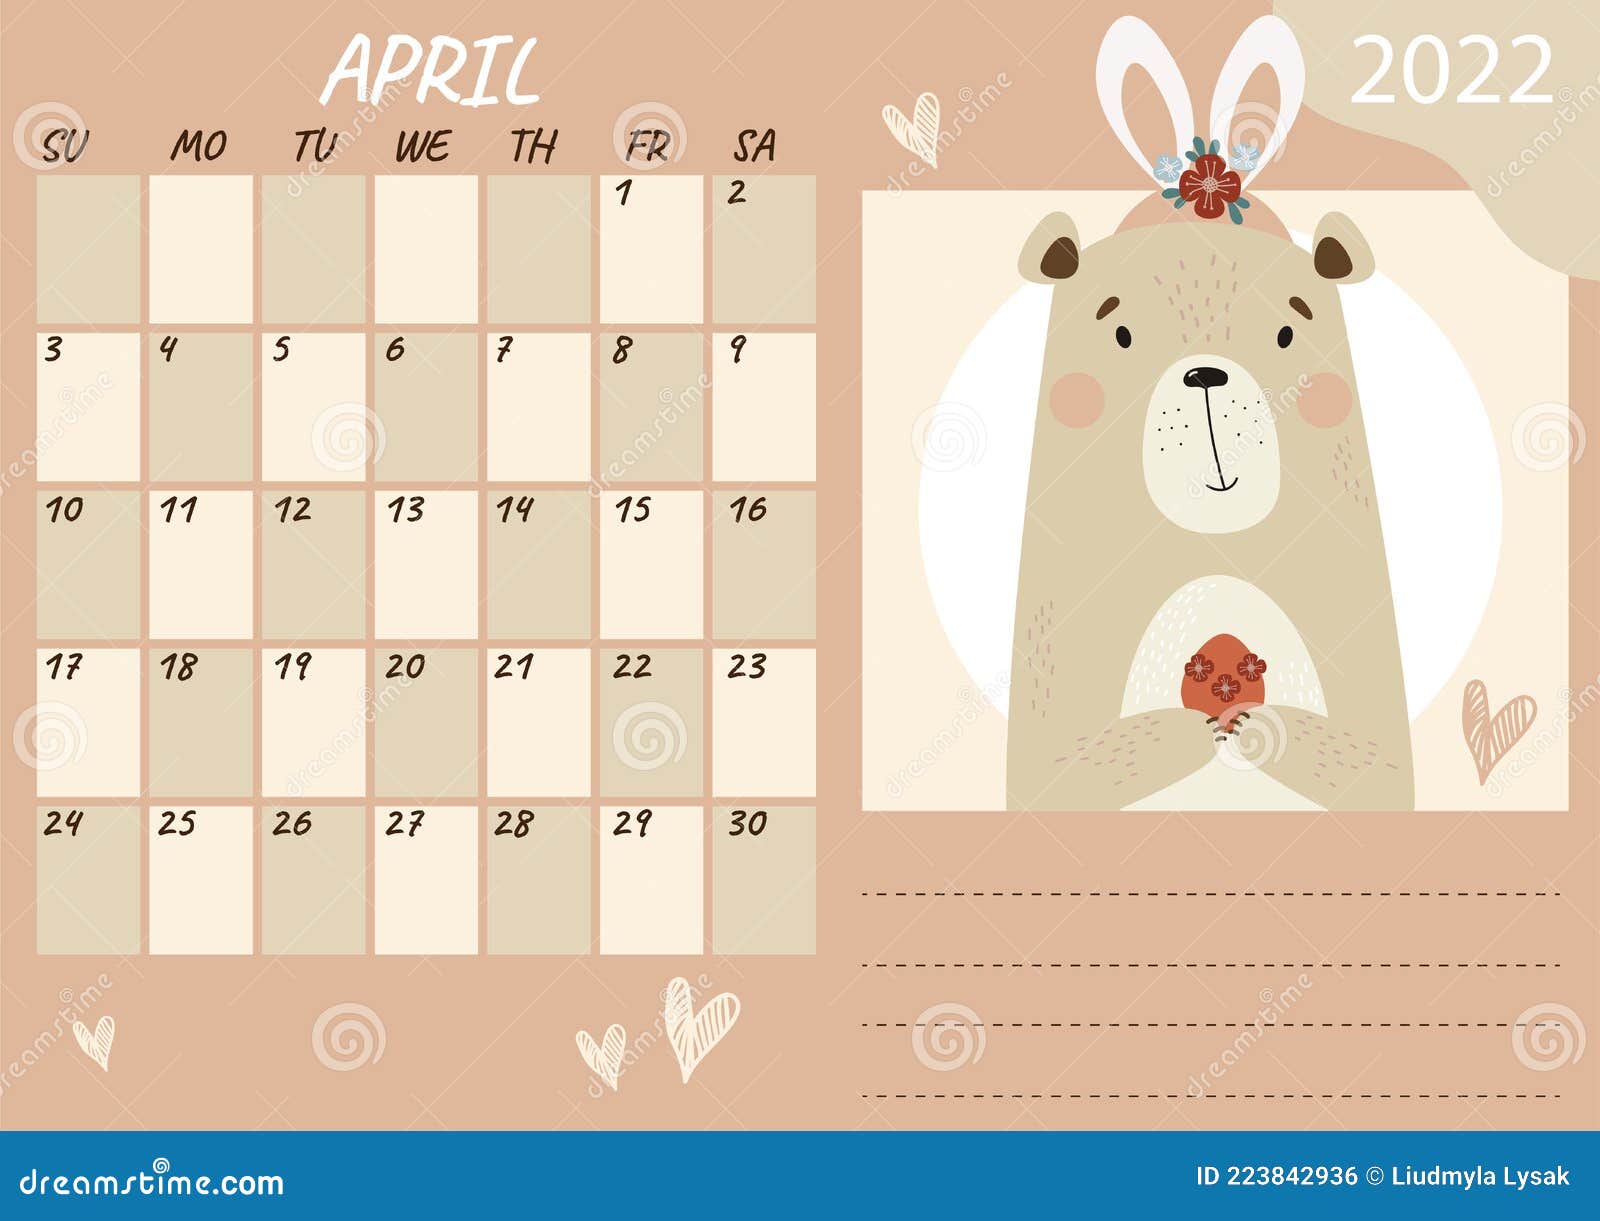 Horizontal Planner Calendar Template For April 2022 Cute Bear With Easter Bunny Ears And With An Easter Egg Vector Illustration Stock Vector Illustration Of Funny 2022 223842936